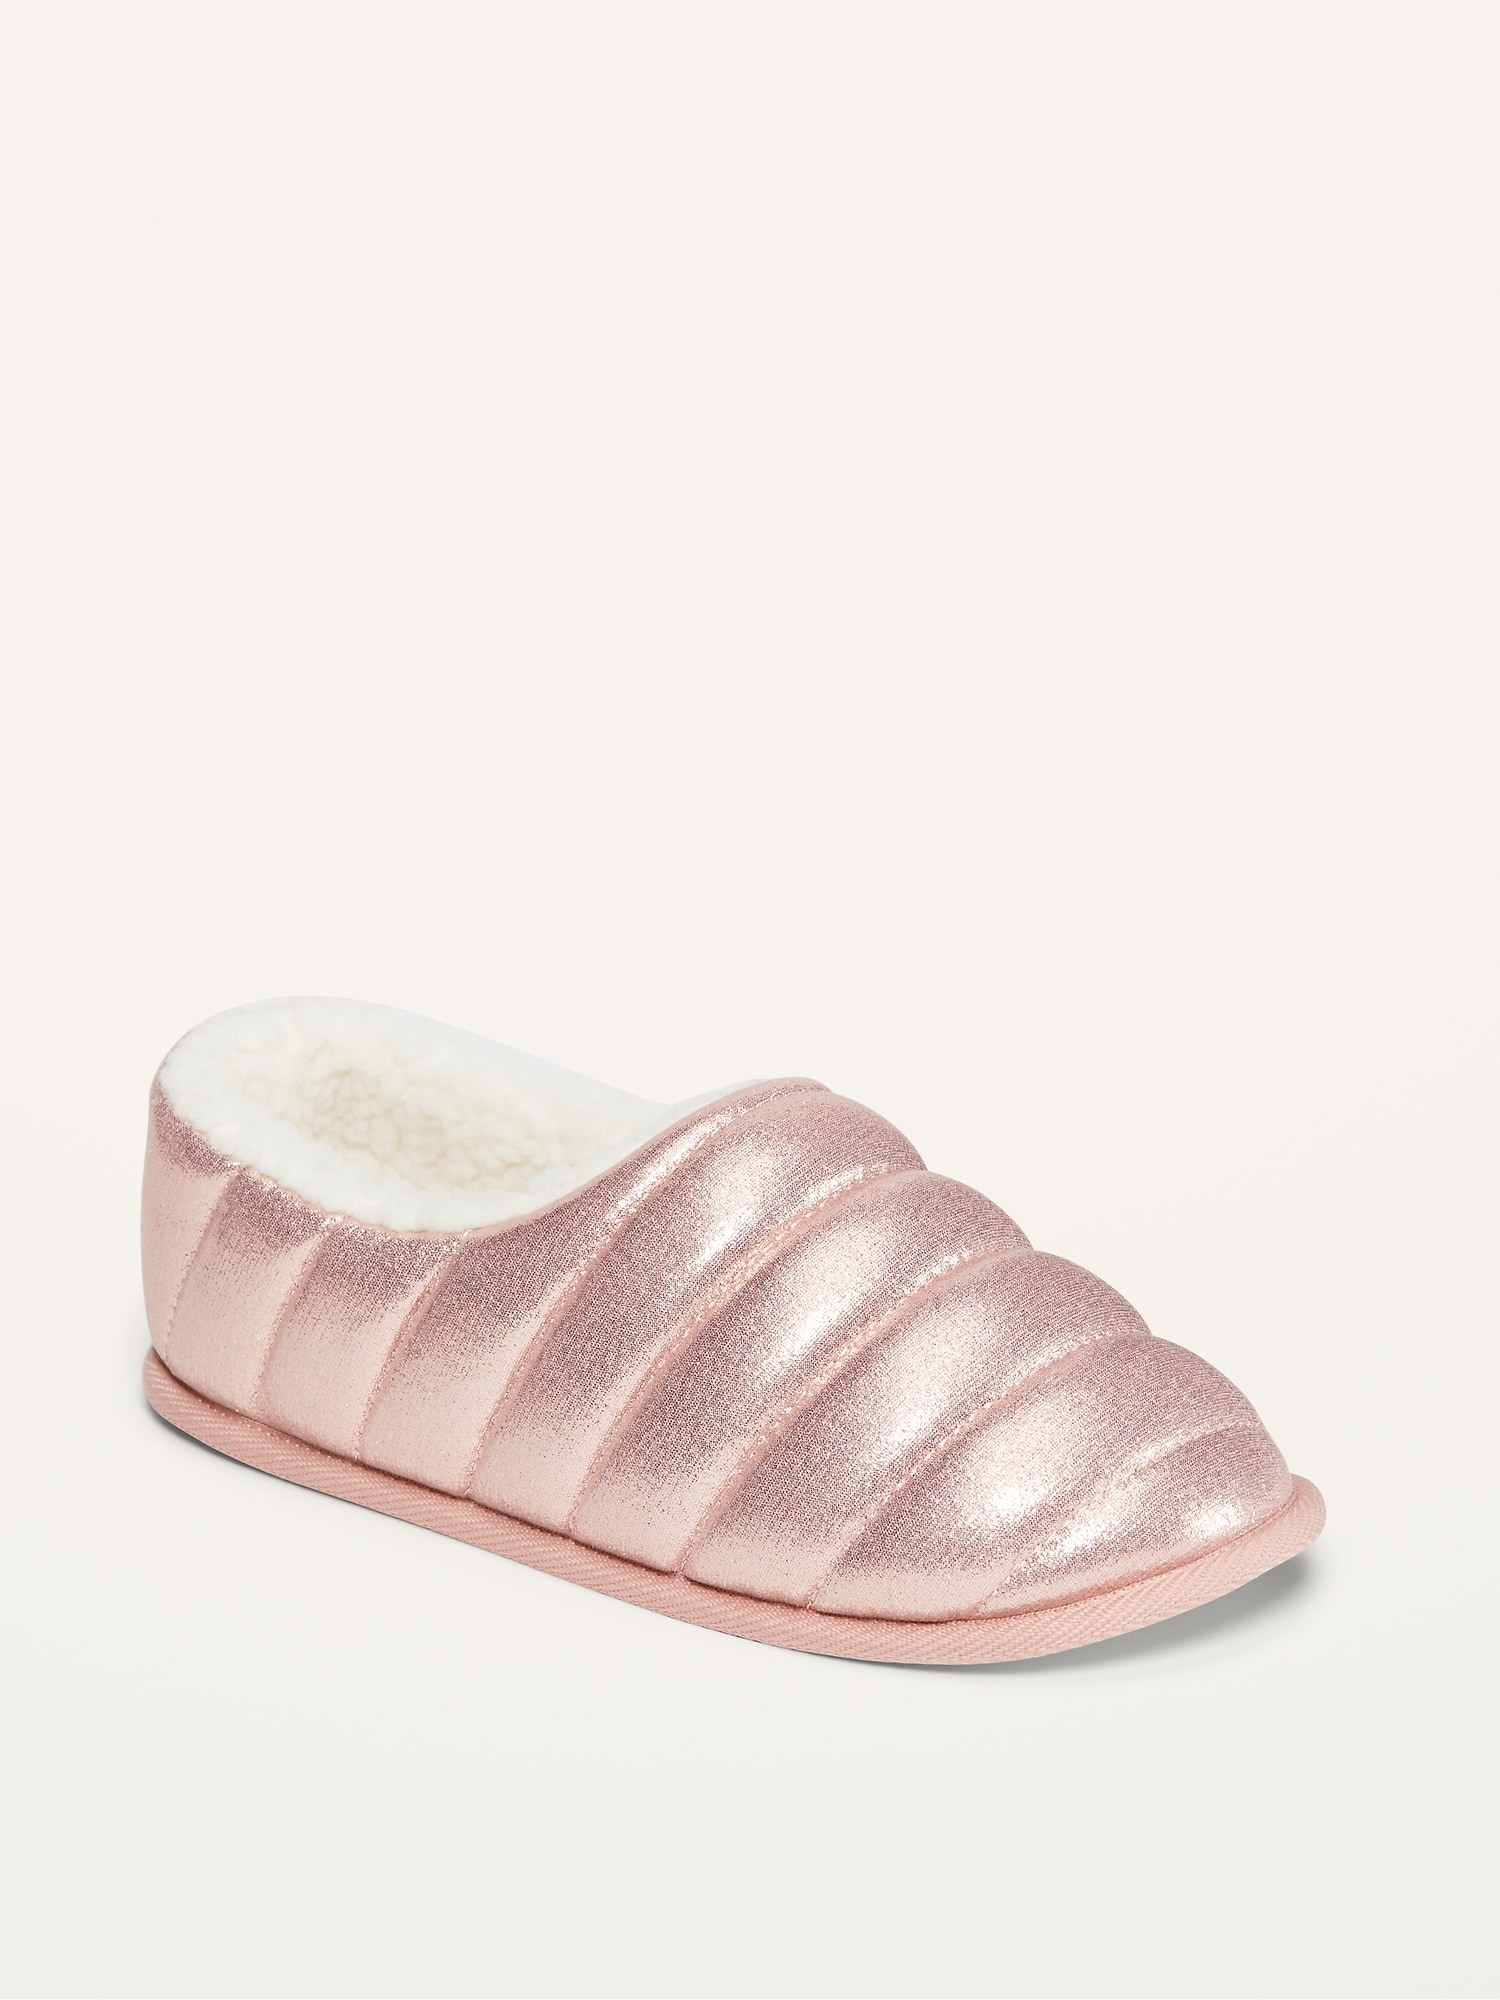 old navy rose gold slippers